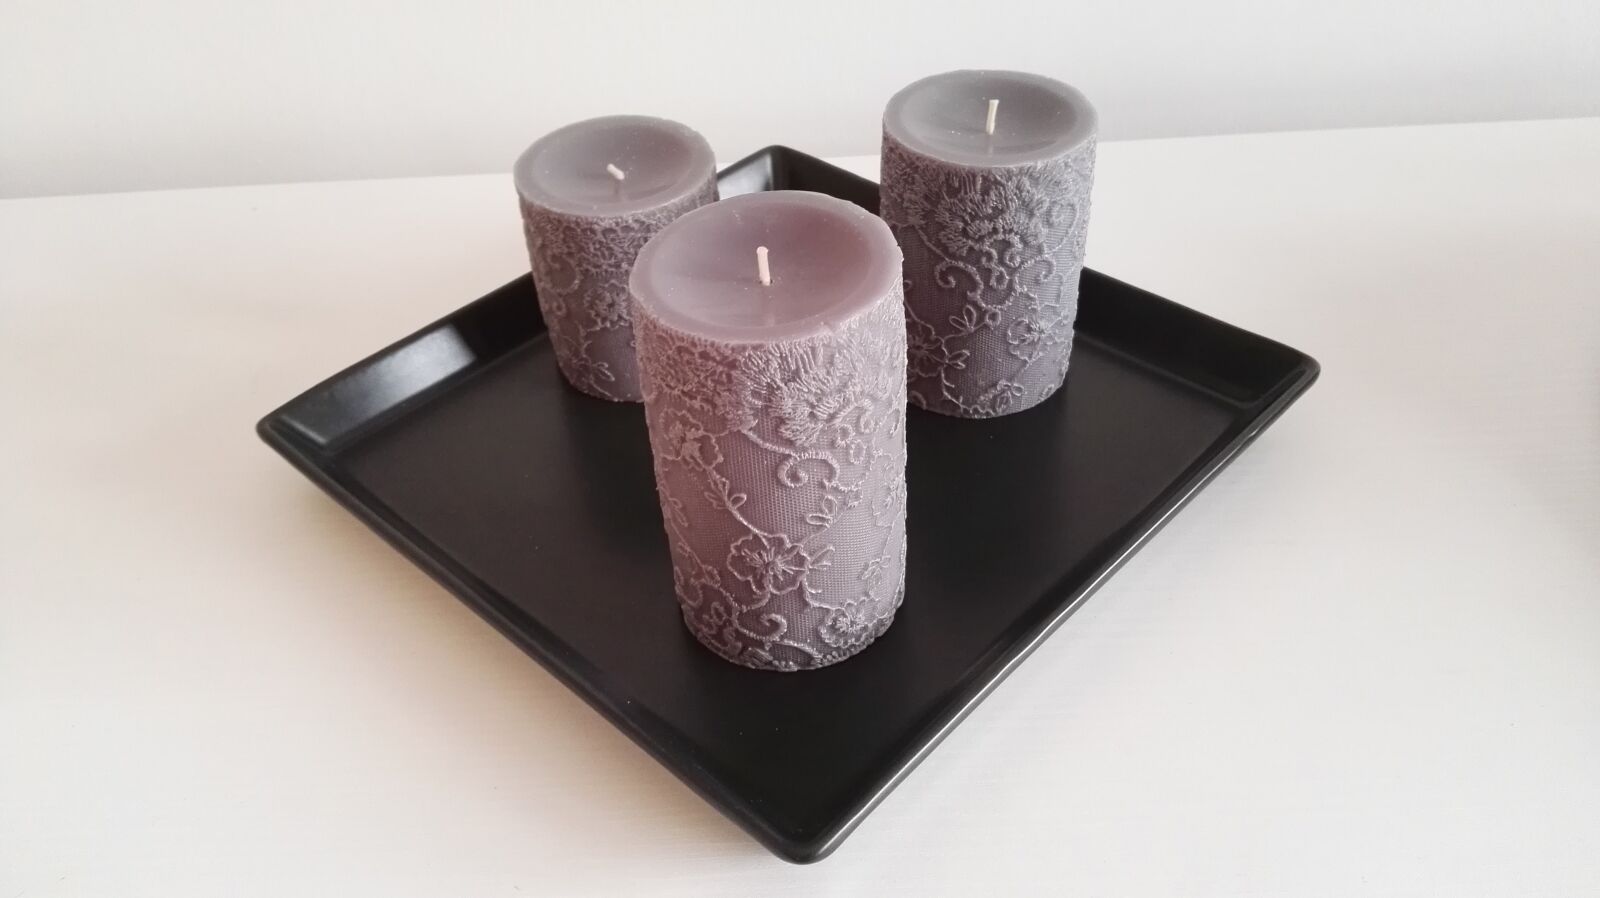 HUAWEI P8 sample photo. Candles, wax, candlestick photography